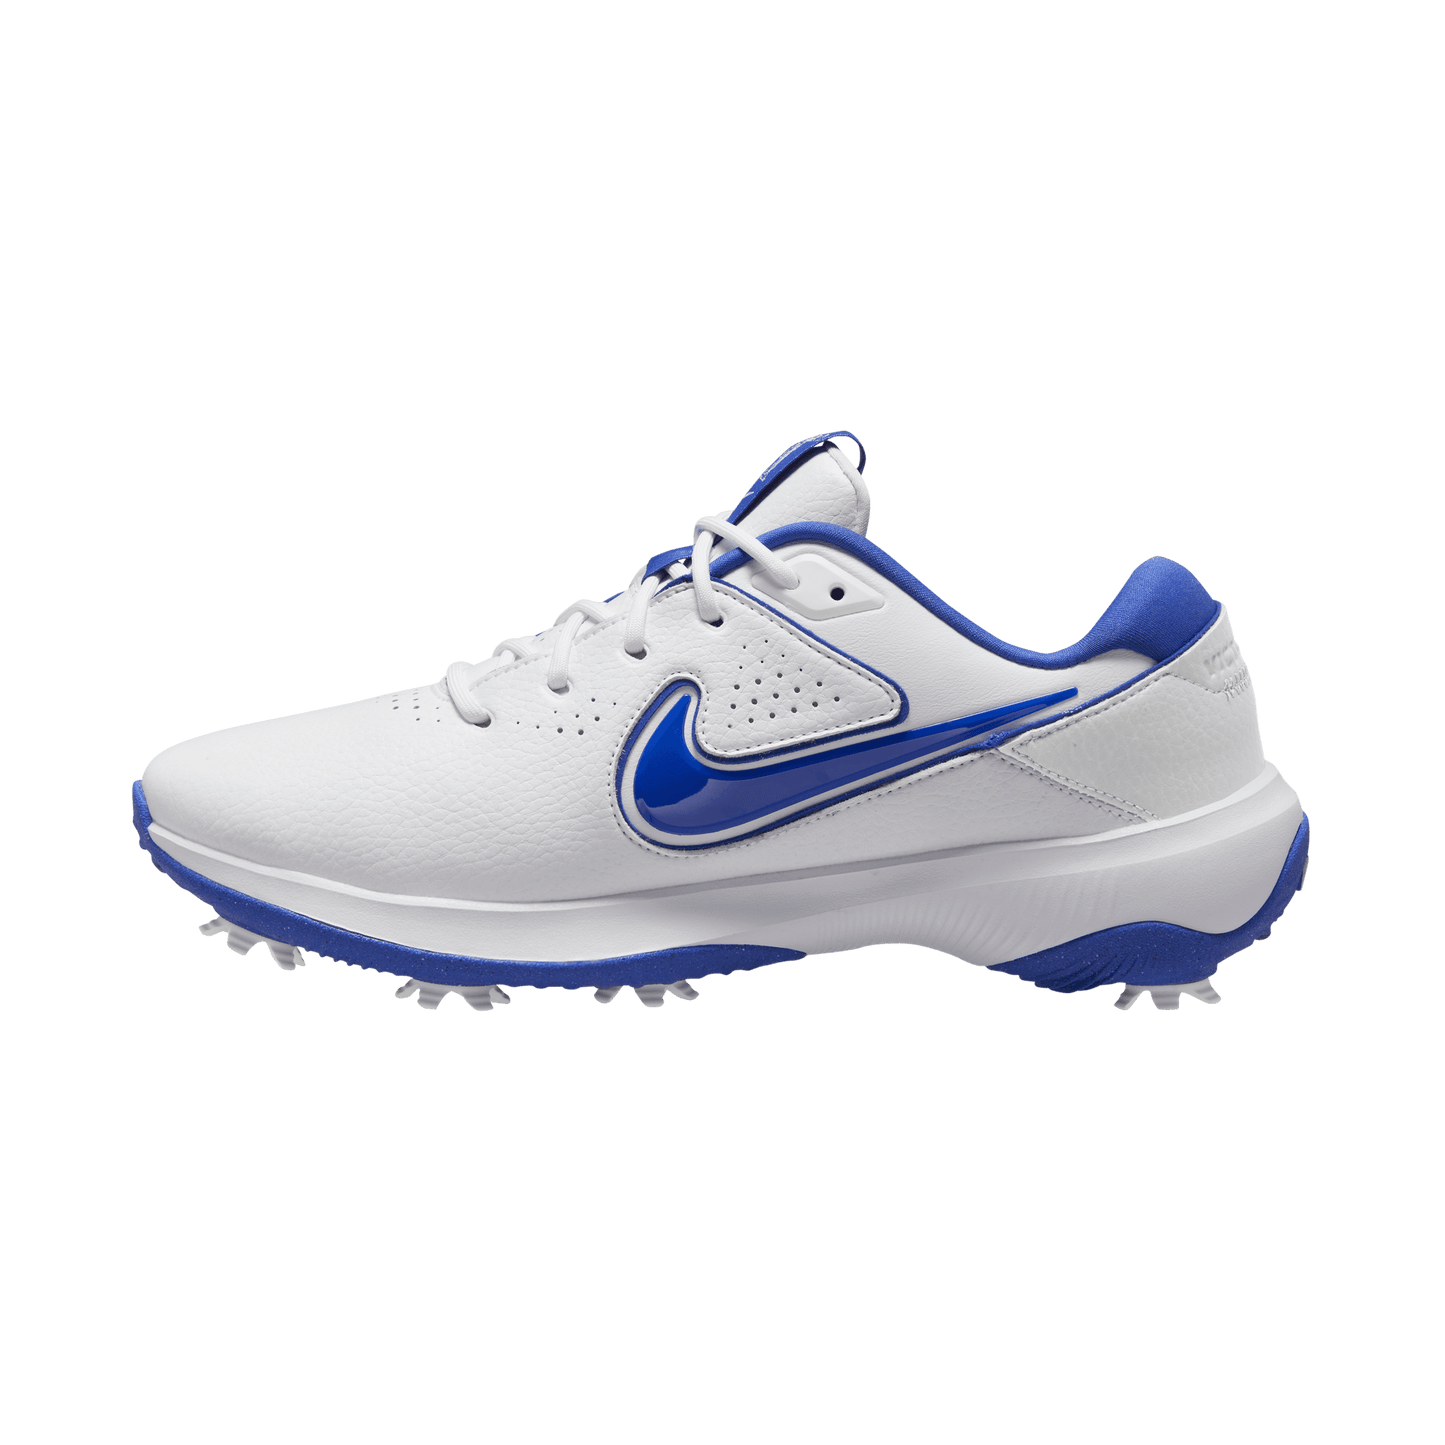 Nike Golf Victory Pro 3 Spiked Shoes DV6800 White/Hyper Royal Blue 140 7 